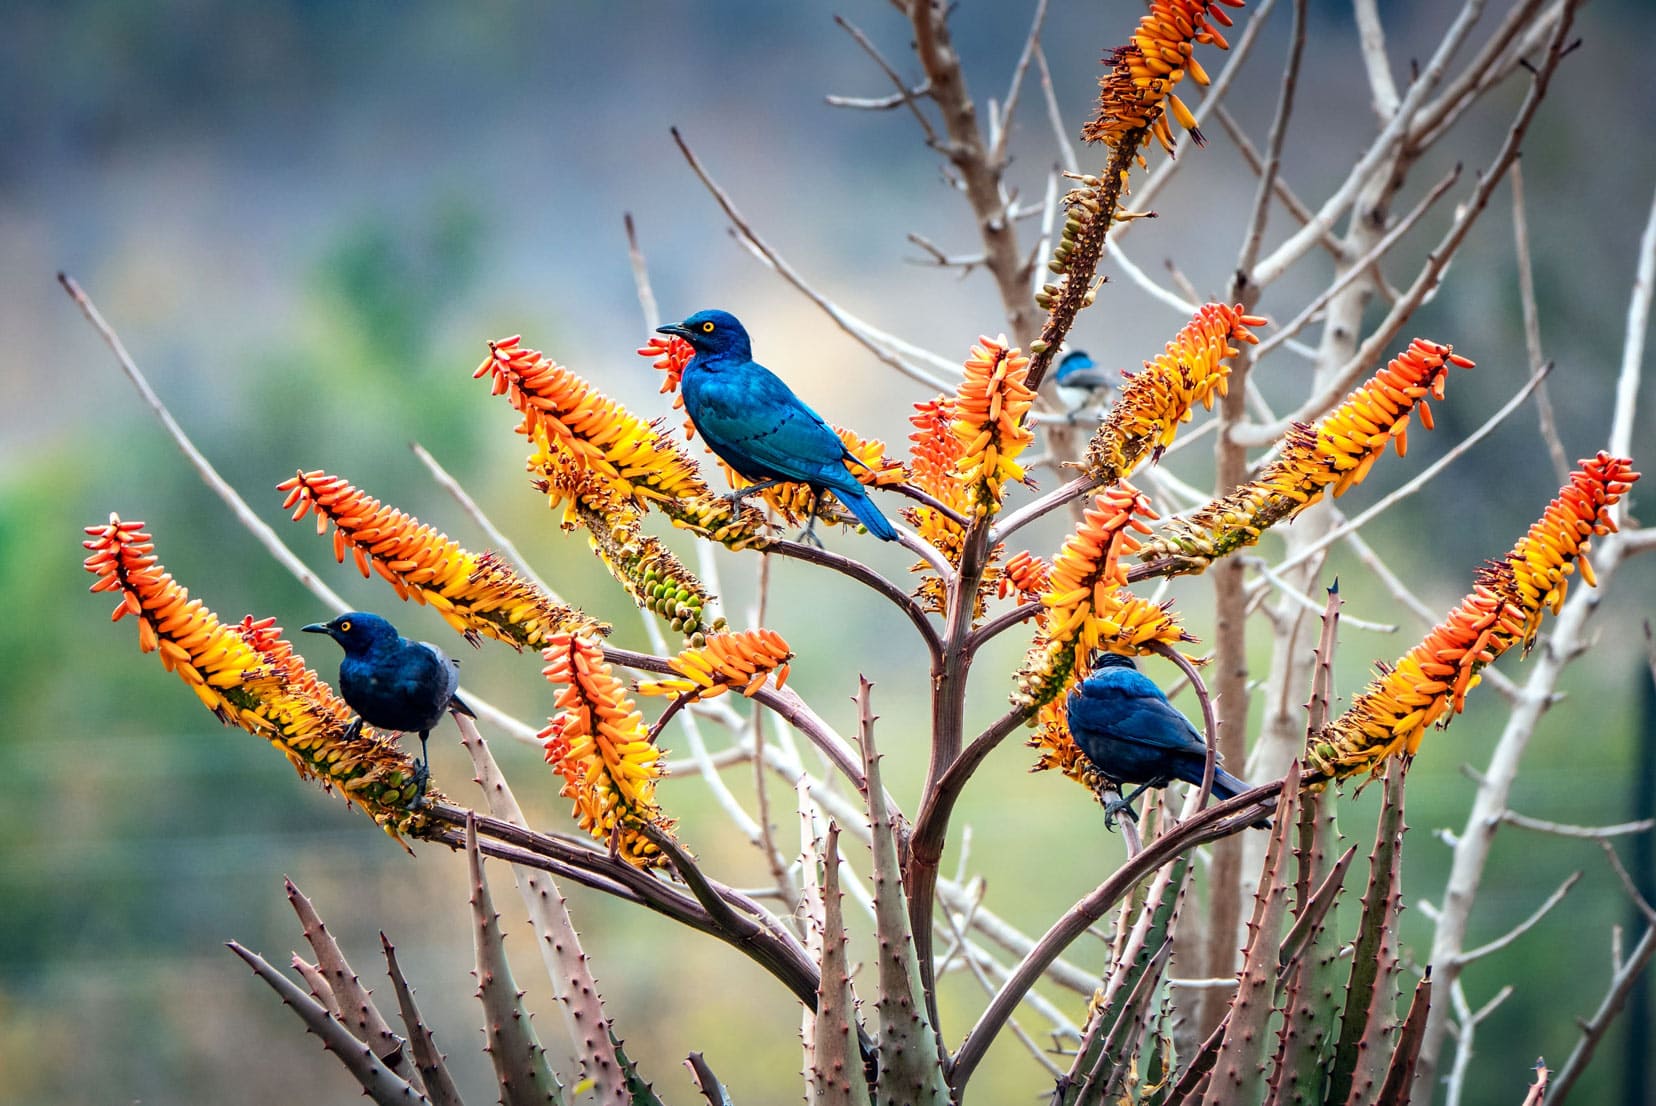 Three blue starlings sat in an Aloe plant with bright orange flowers